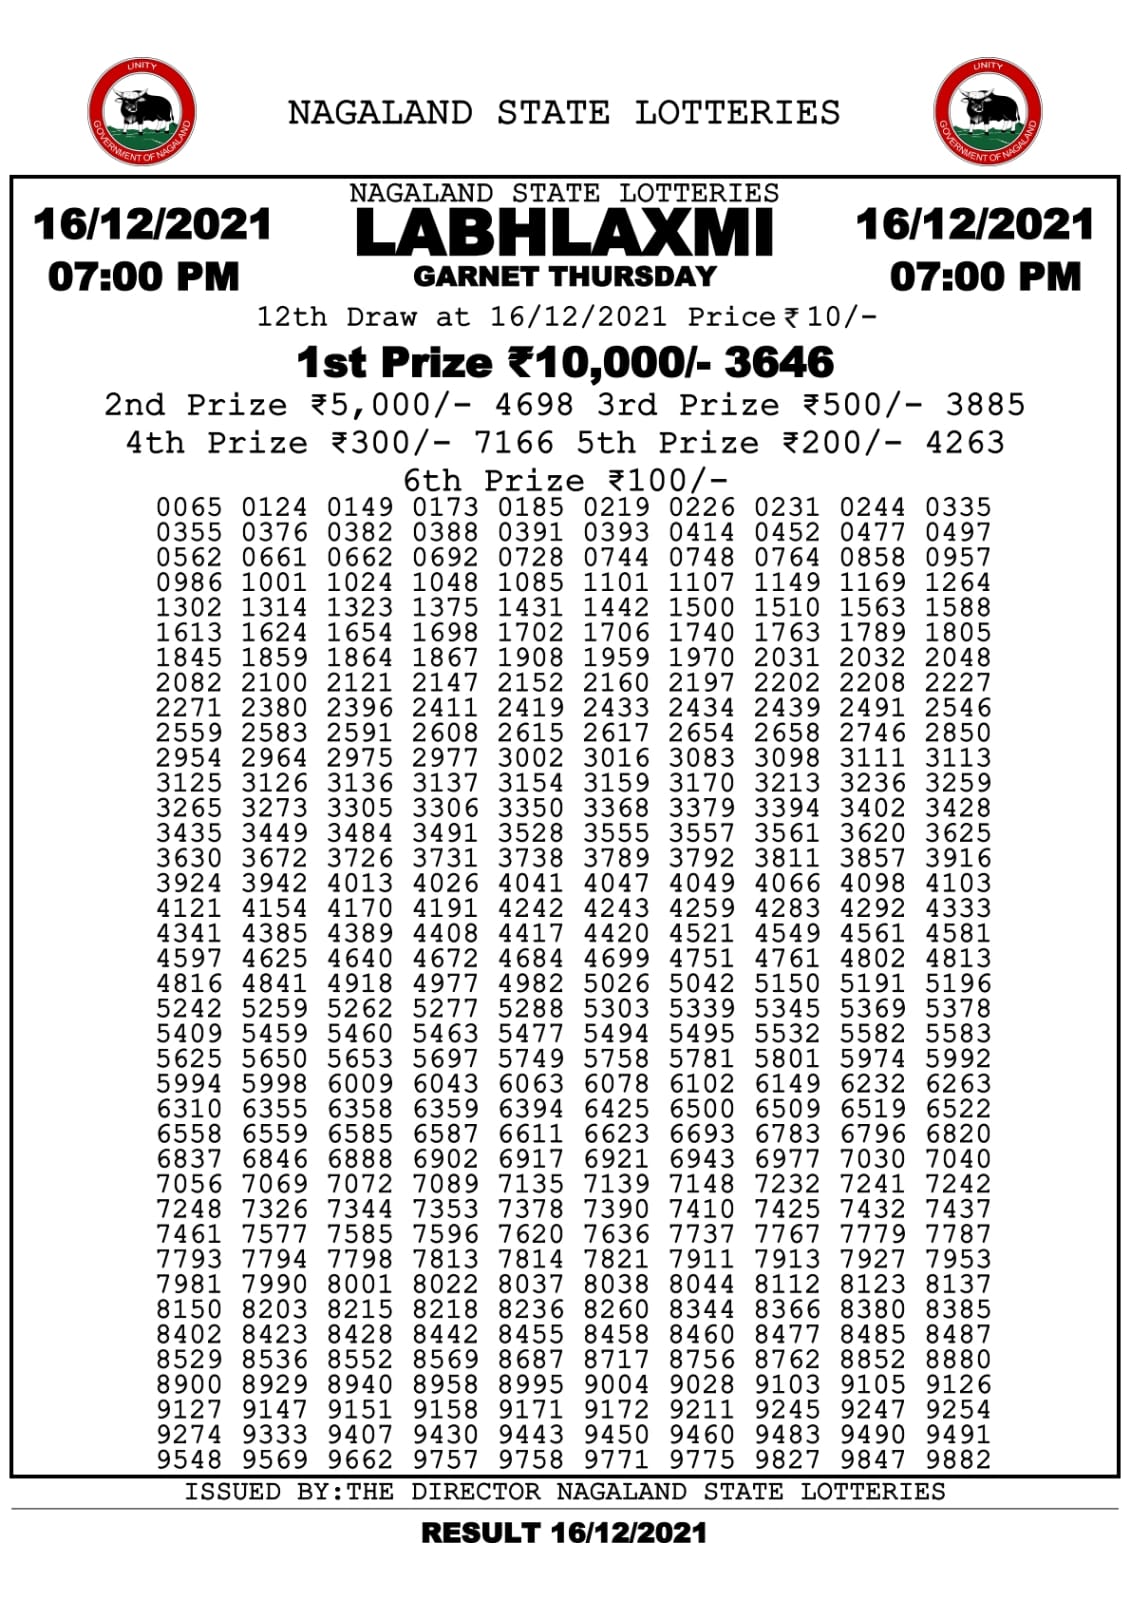 Labhlaxmi 7.00pm Lottery Result 16.12.2021